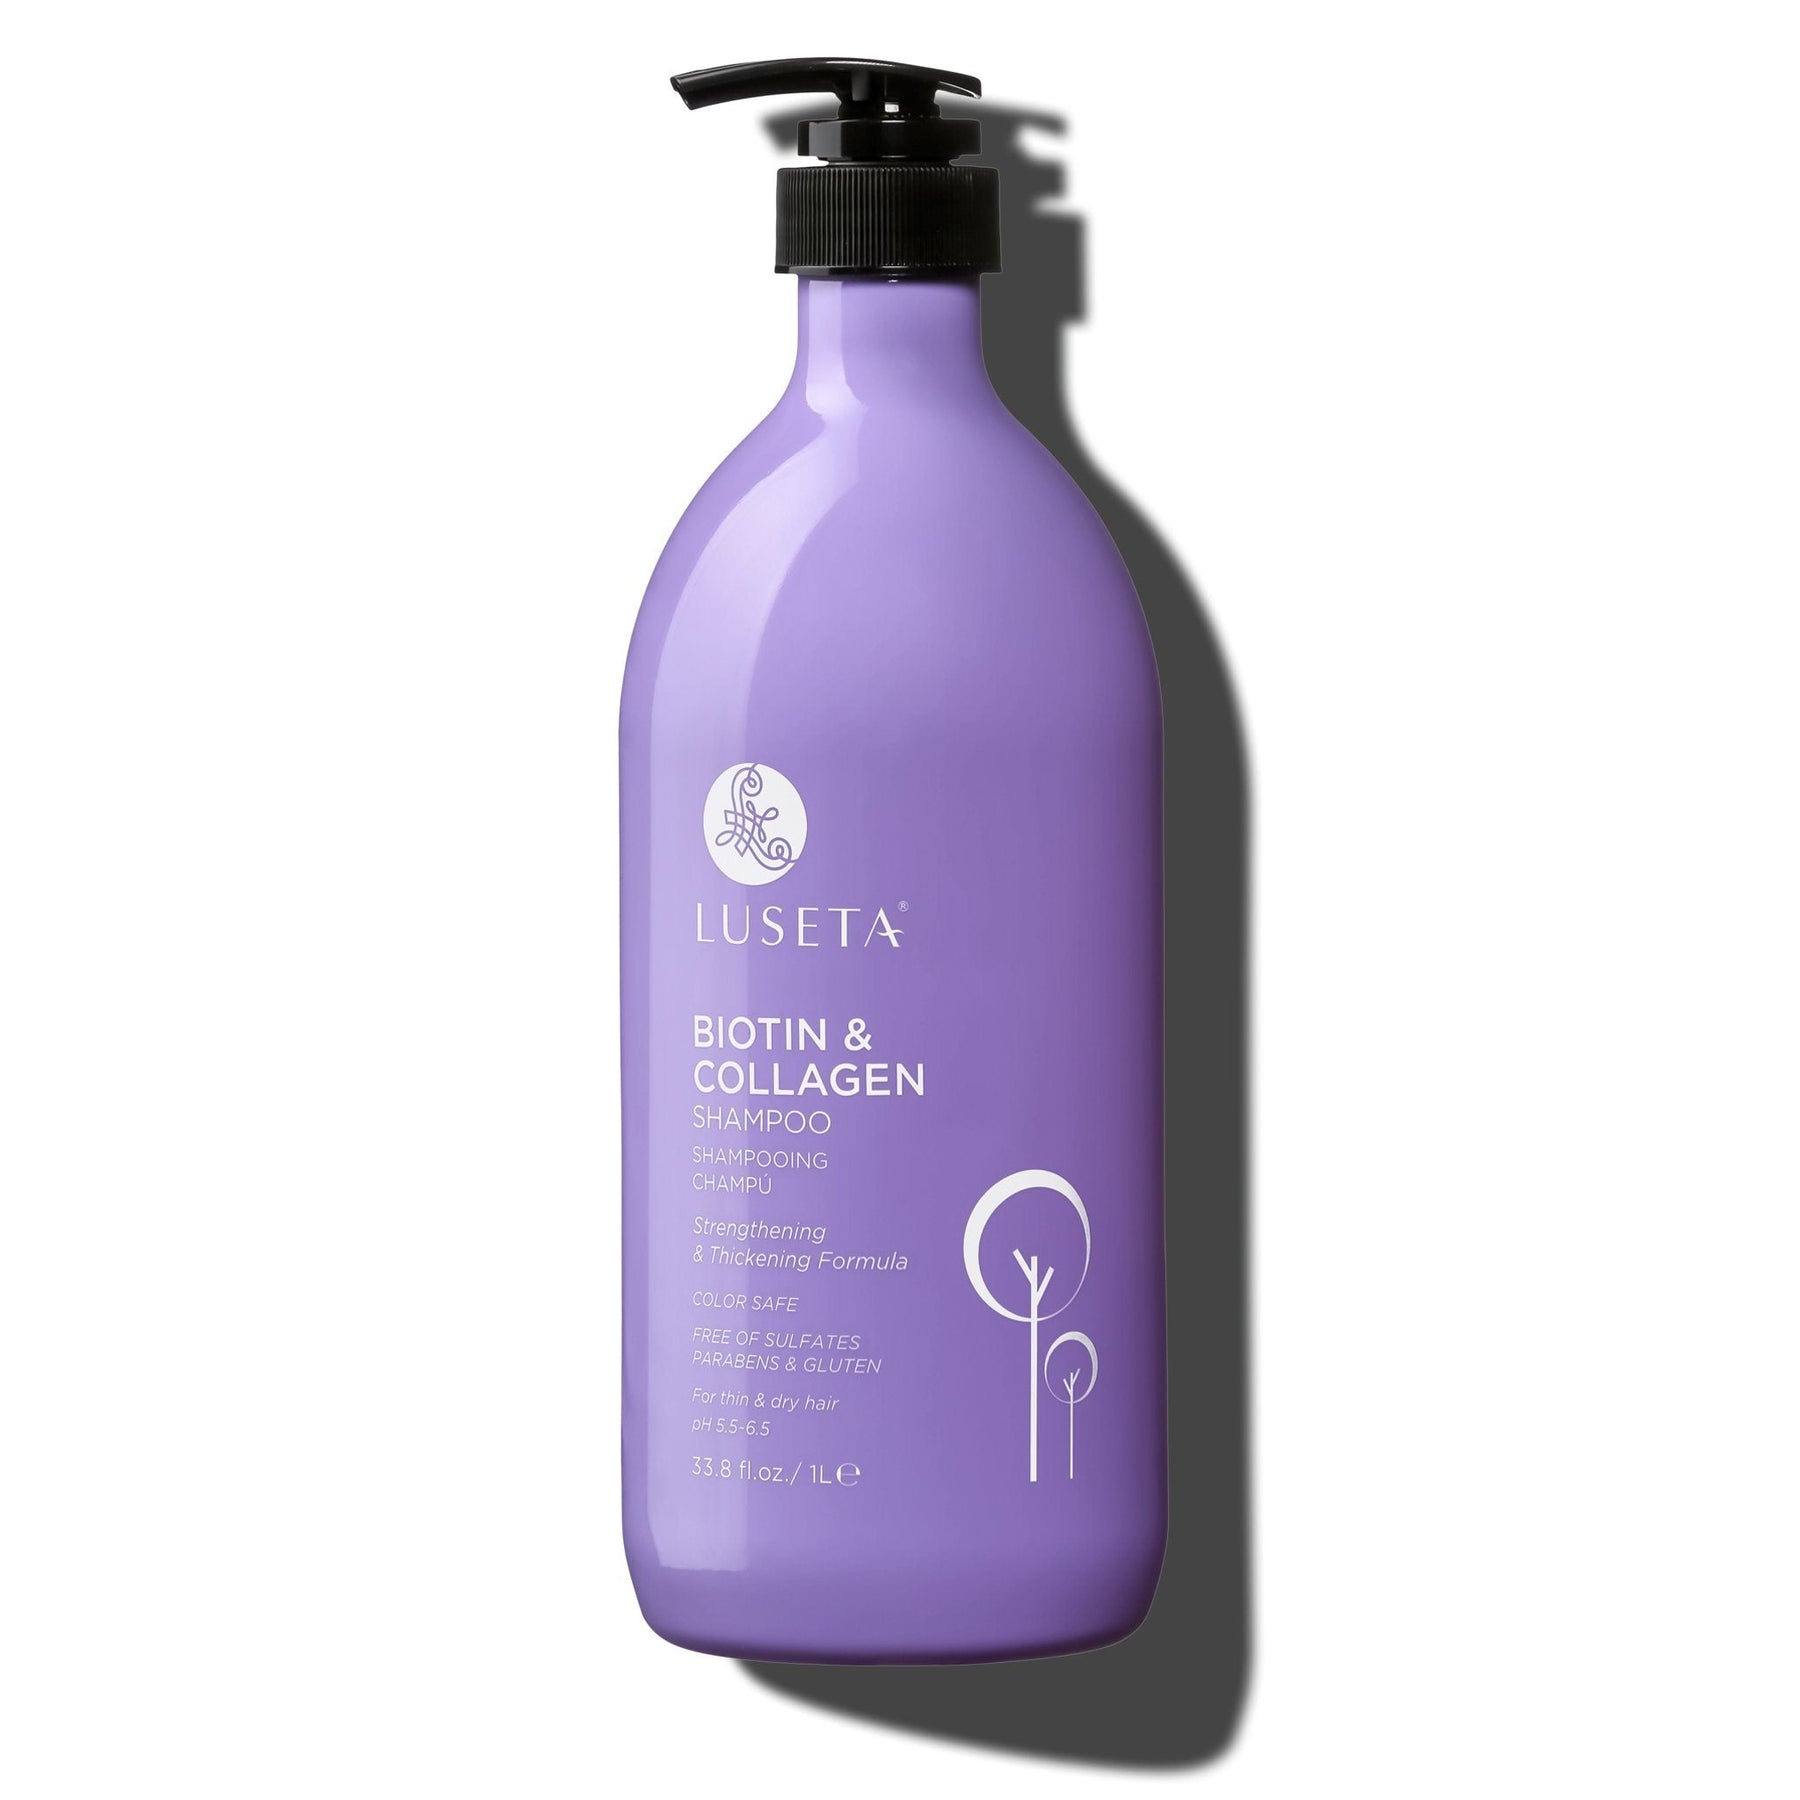 Biotin & Collagen Shampoo - 33.8oz - by Luseta Beauty |ProCare Outlet|